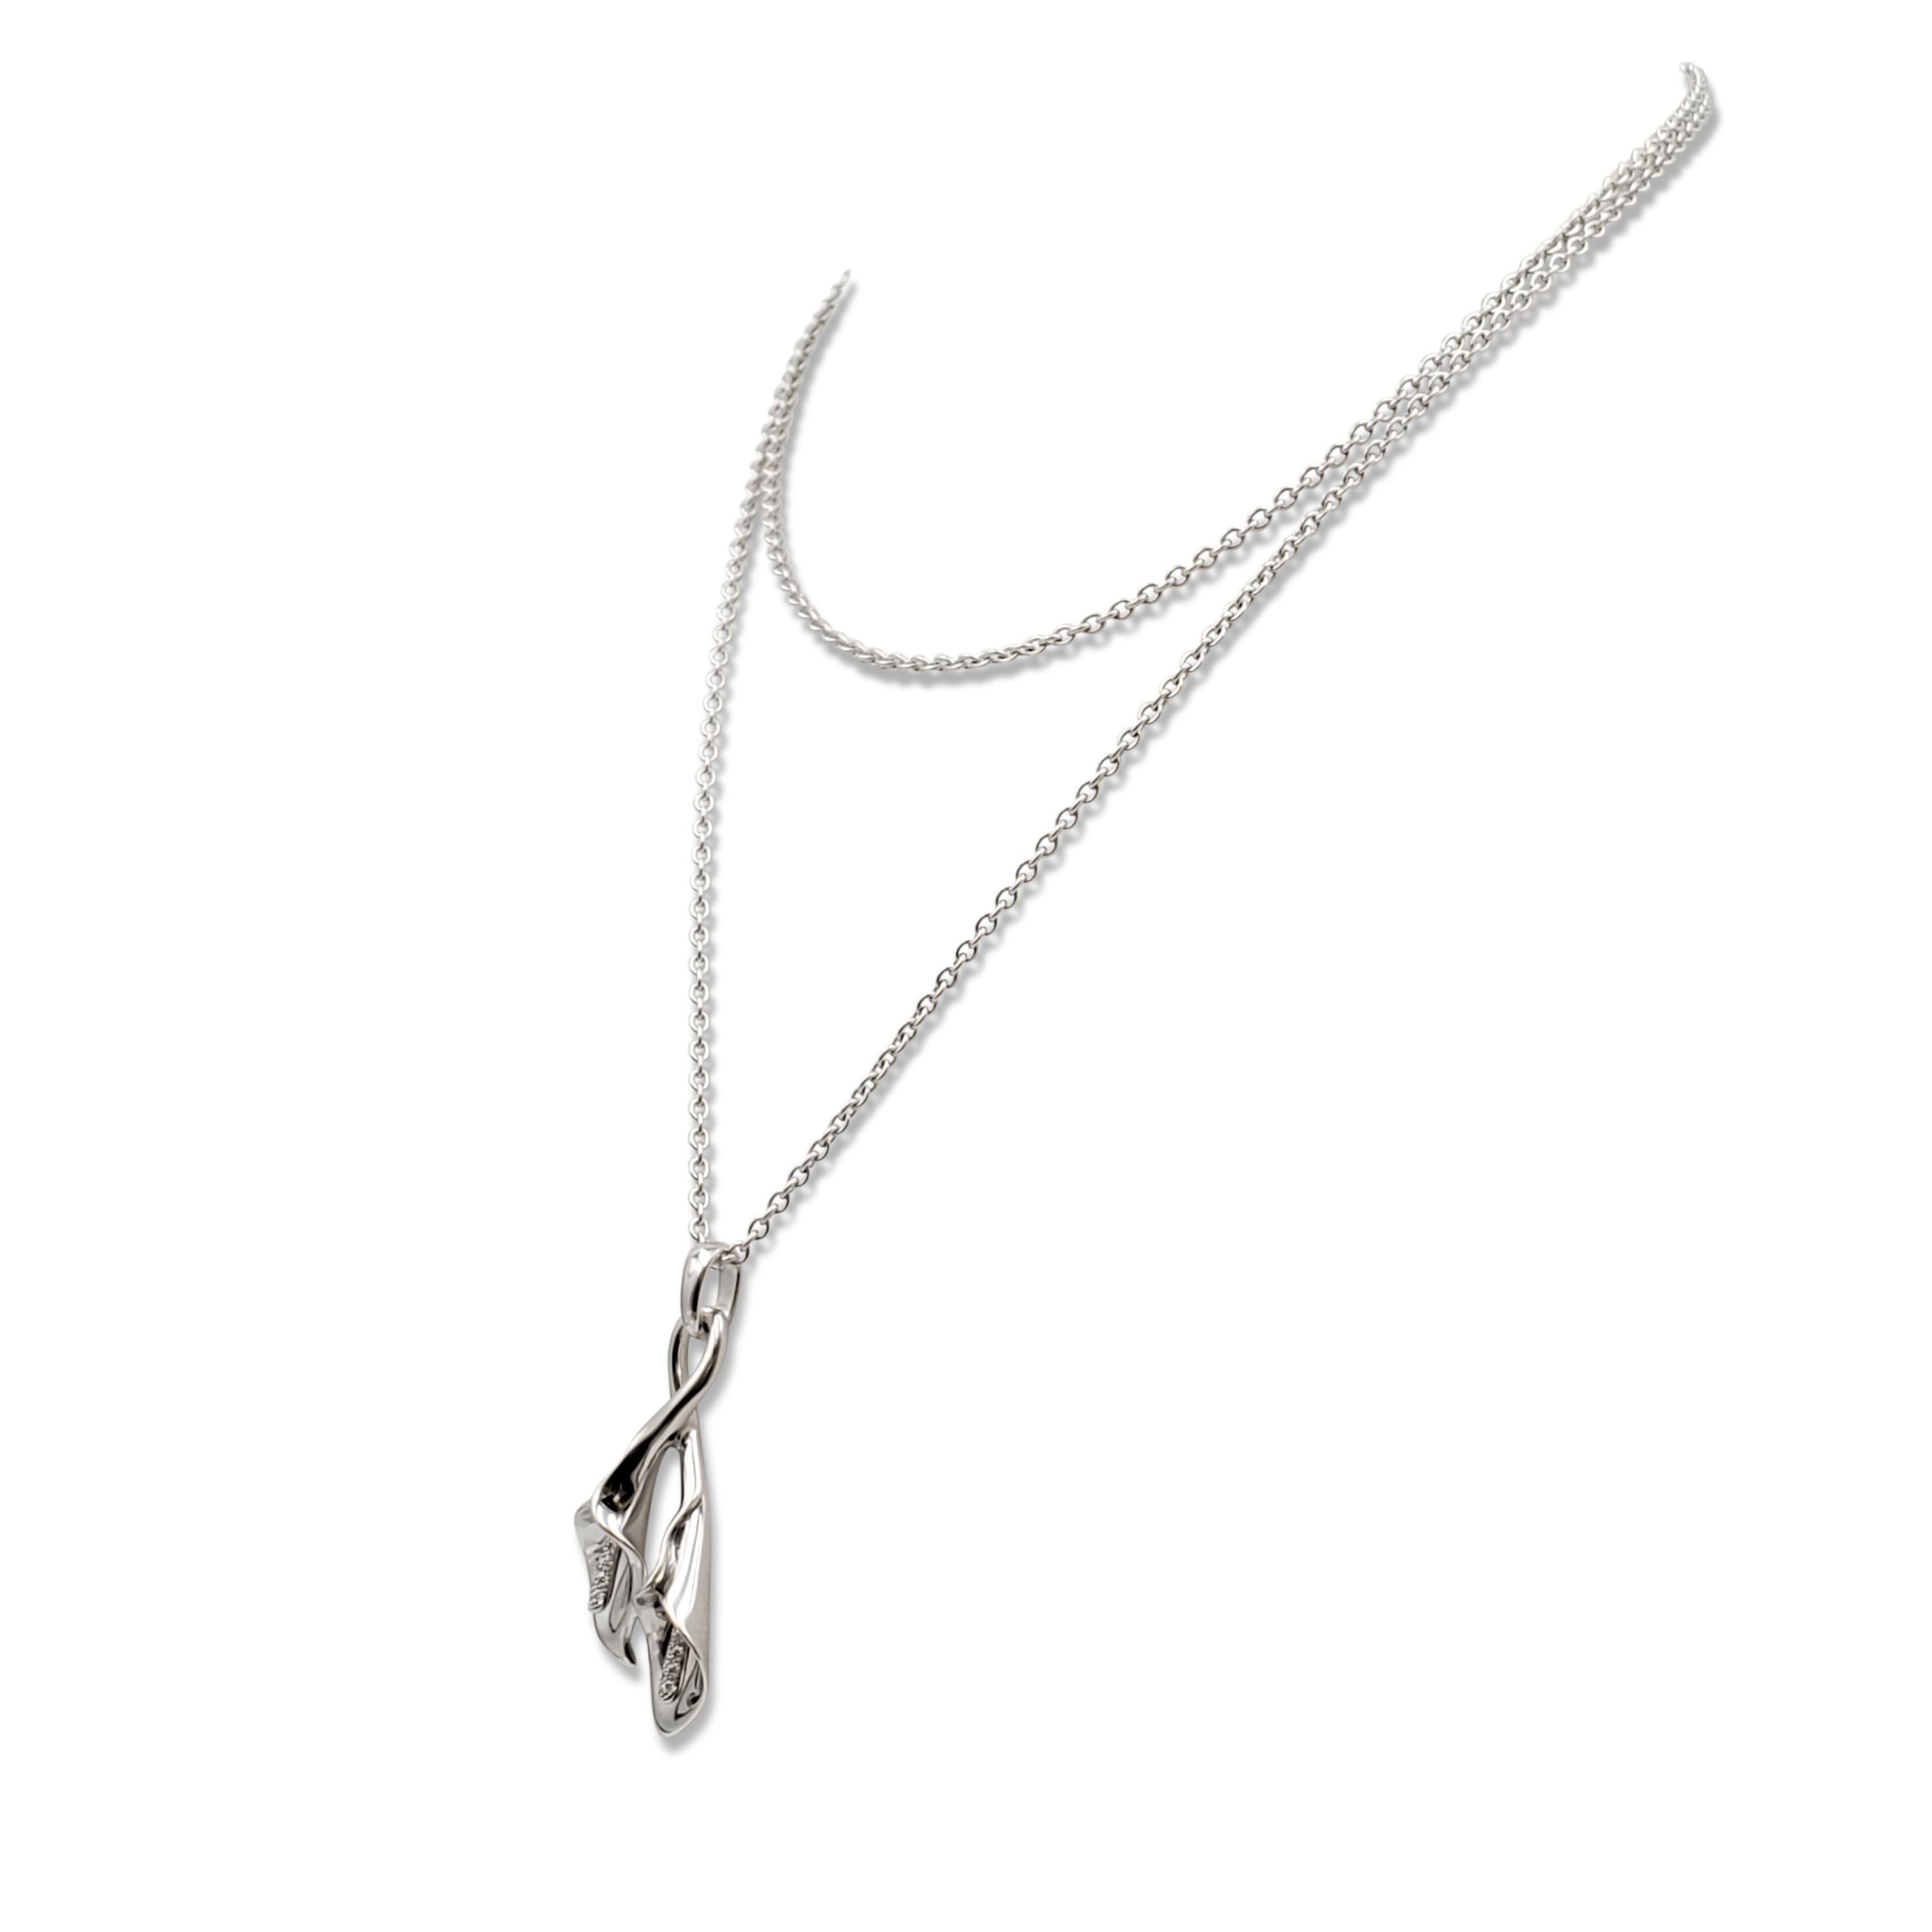 Authentic Asprey pendant designed as a double calla lily set with an estimated 0.25 carats of round brilliant cut diamonds. The pendant hangs from an oval-link chain. Signed Asprey, 750. Not presented with the original box or papers. CIRCA